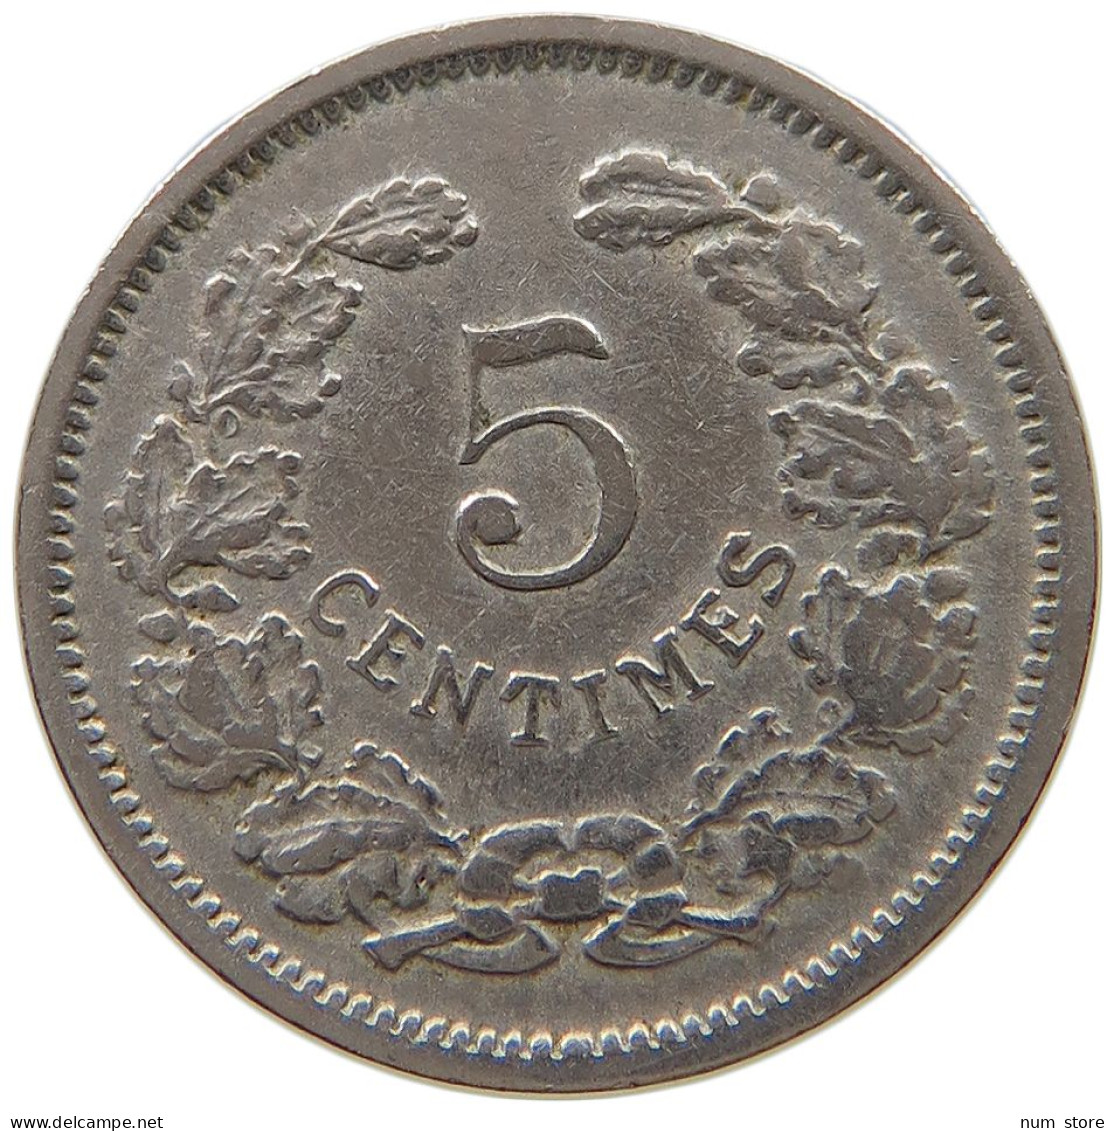 LUXEMBOURG 5 CENTIMES 1901 #a046 0981 - Luxembourg